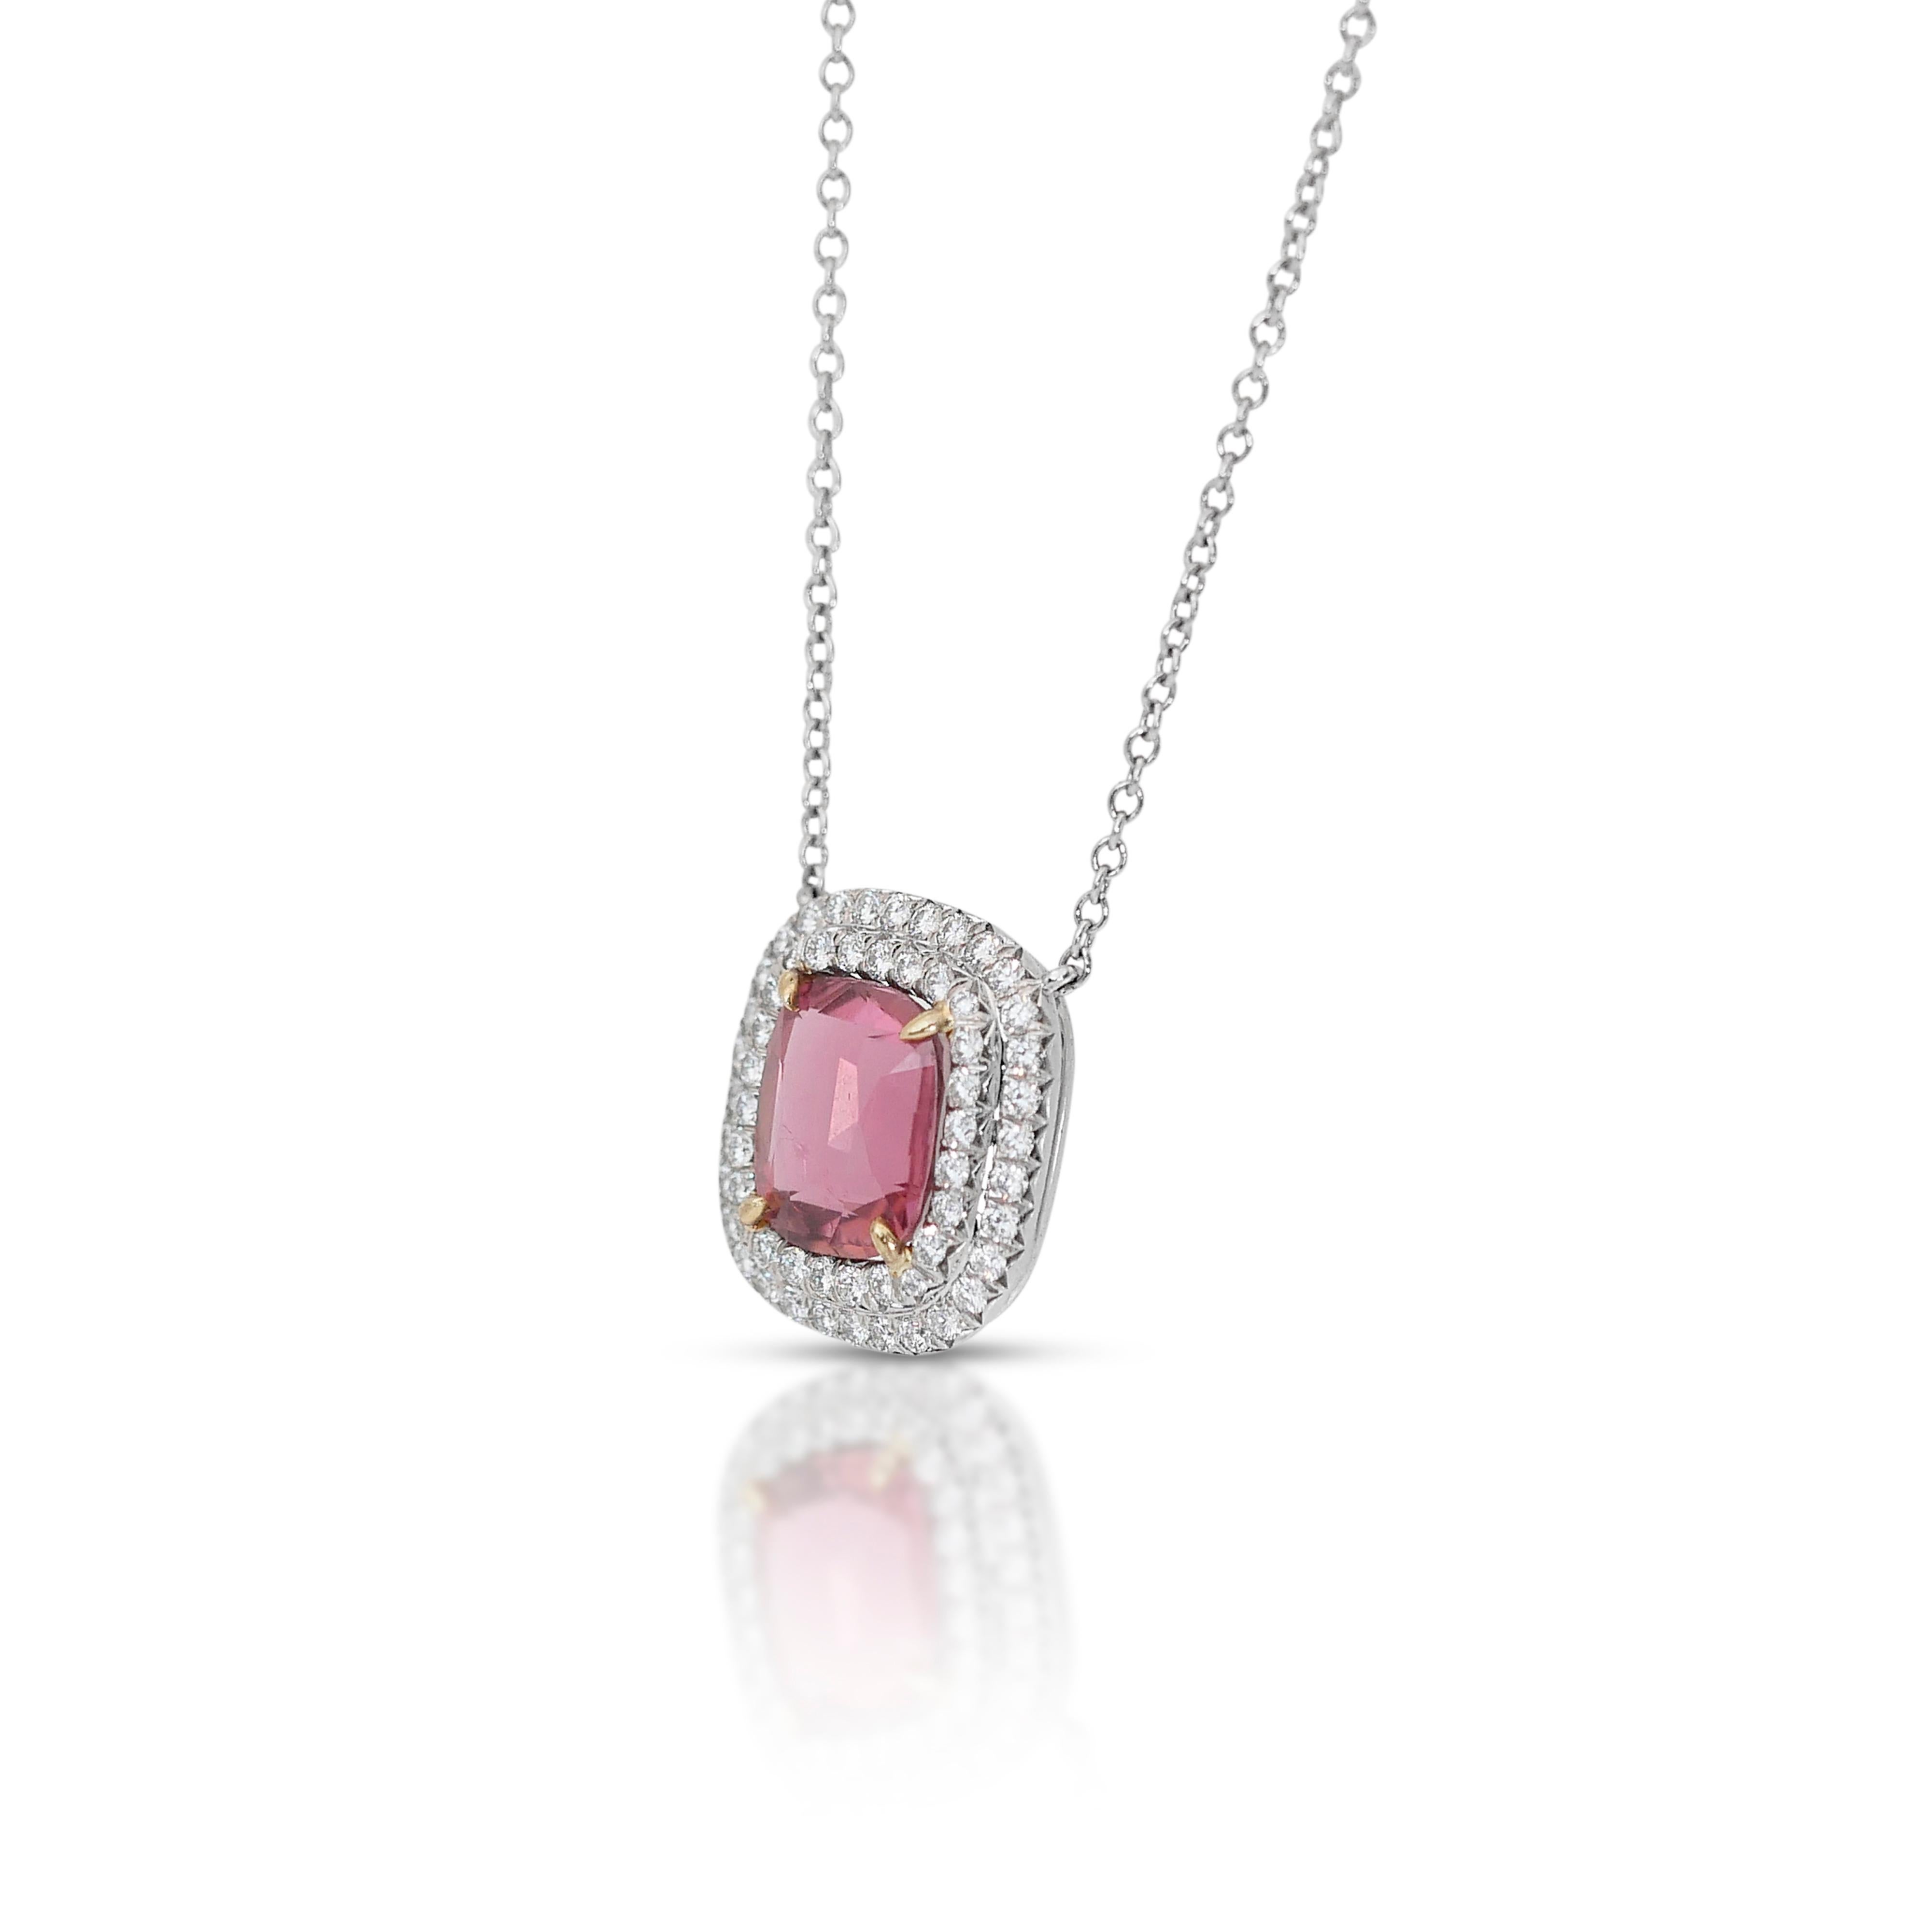 Cushion Cut Alluring 2.70ct Tourmaline and Diamonds Halo Necklace in 18k White & Yellow Gold For Sale